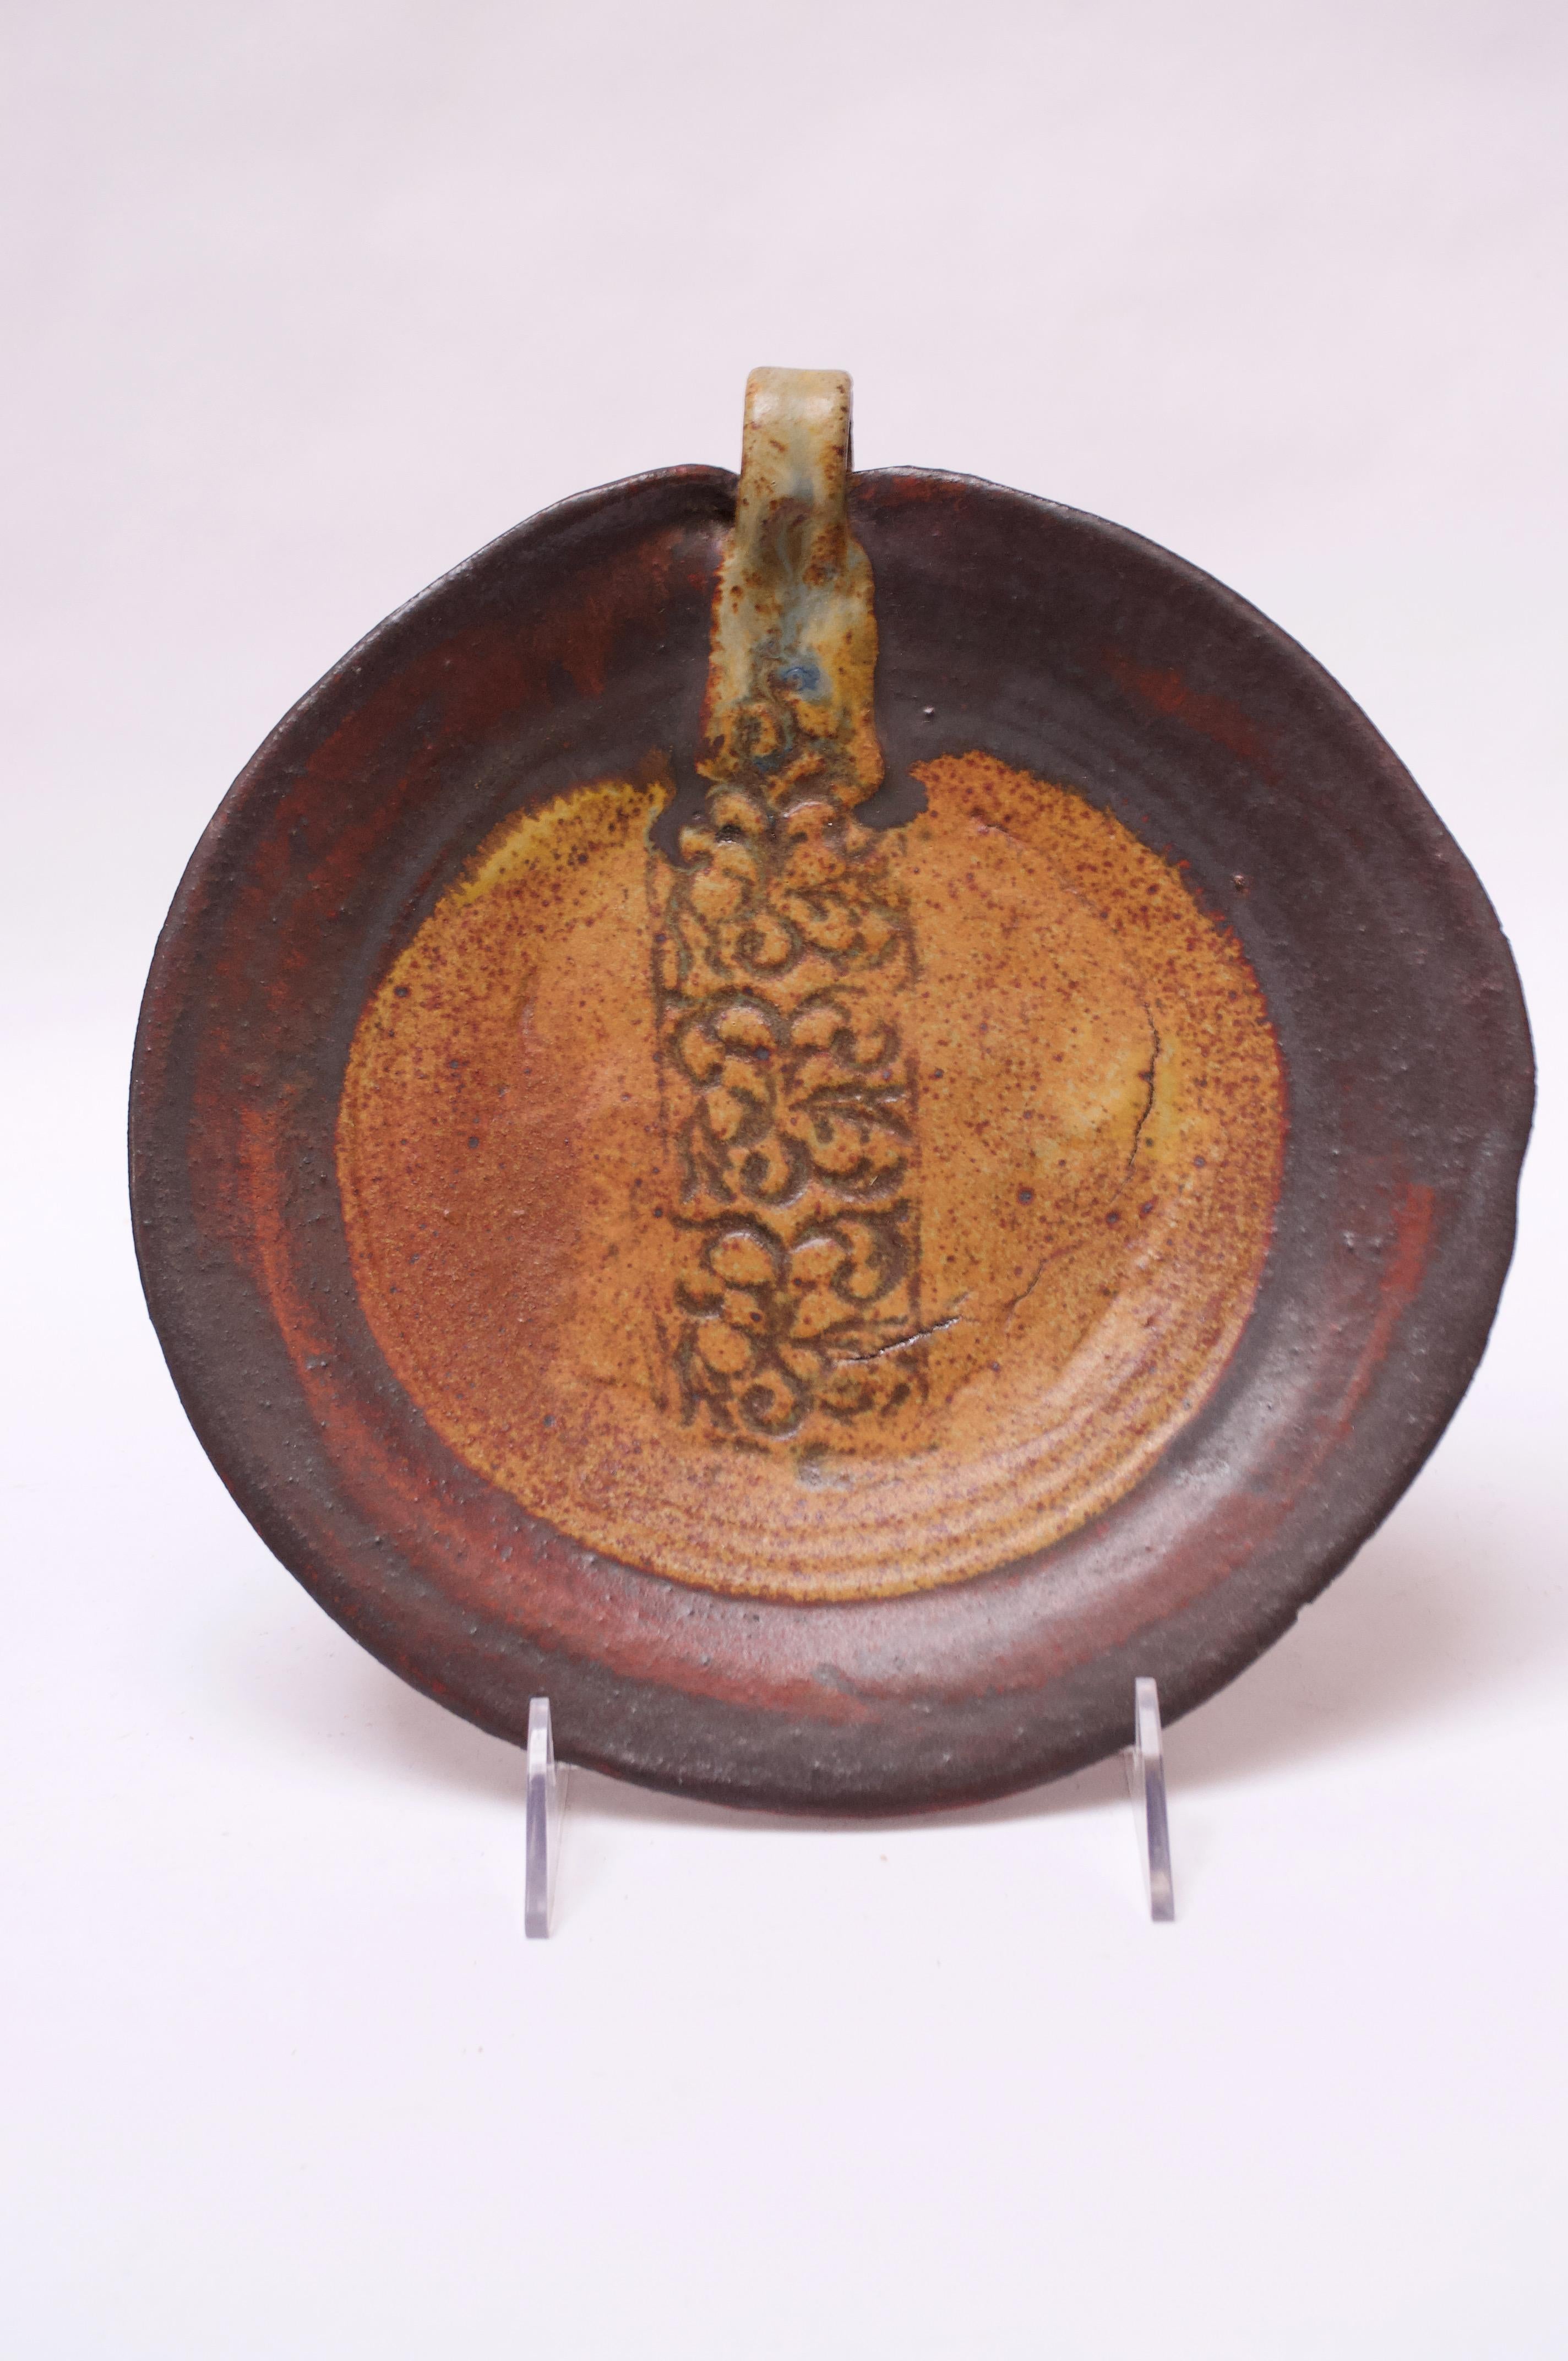 Striking stoneware charger / decorative plate in attractive earth tones of ochre and brown with swaths of red and a strip of brown leather attached to the handle. Central pattern featuring sgraffito technique, adds a nice textural element, while the